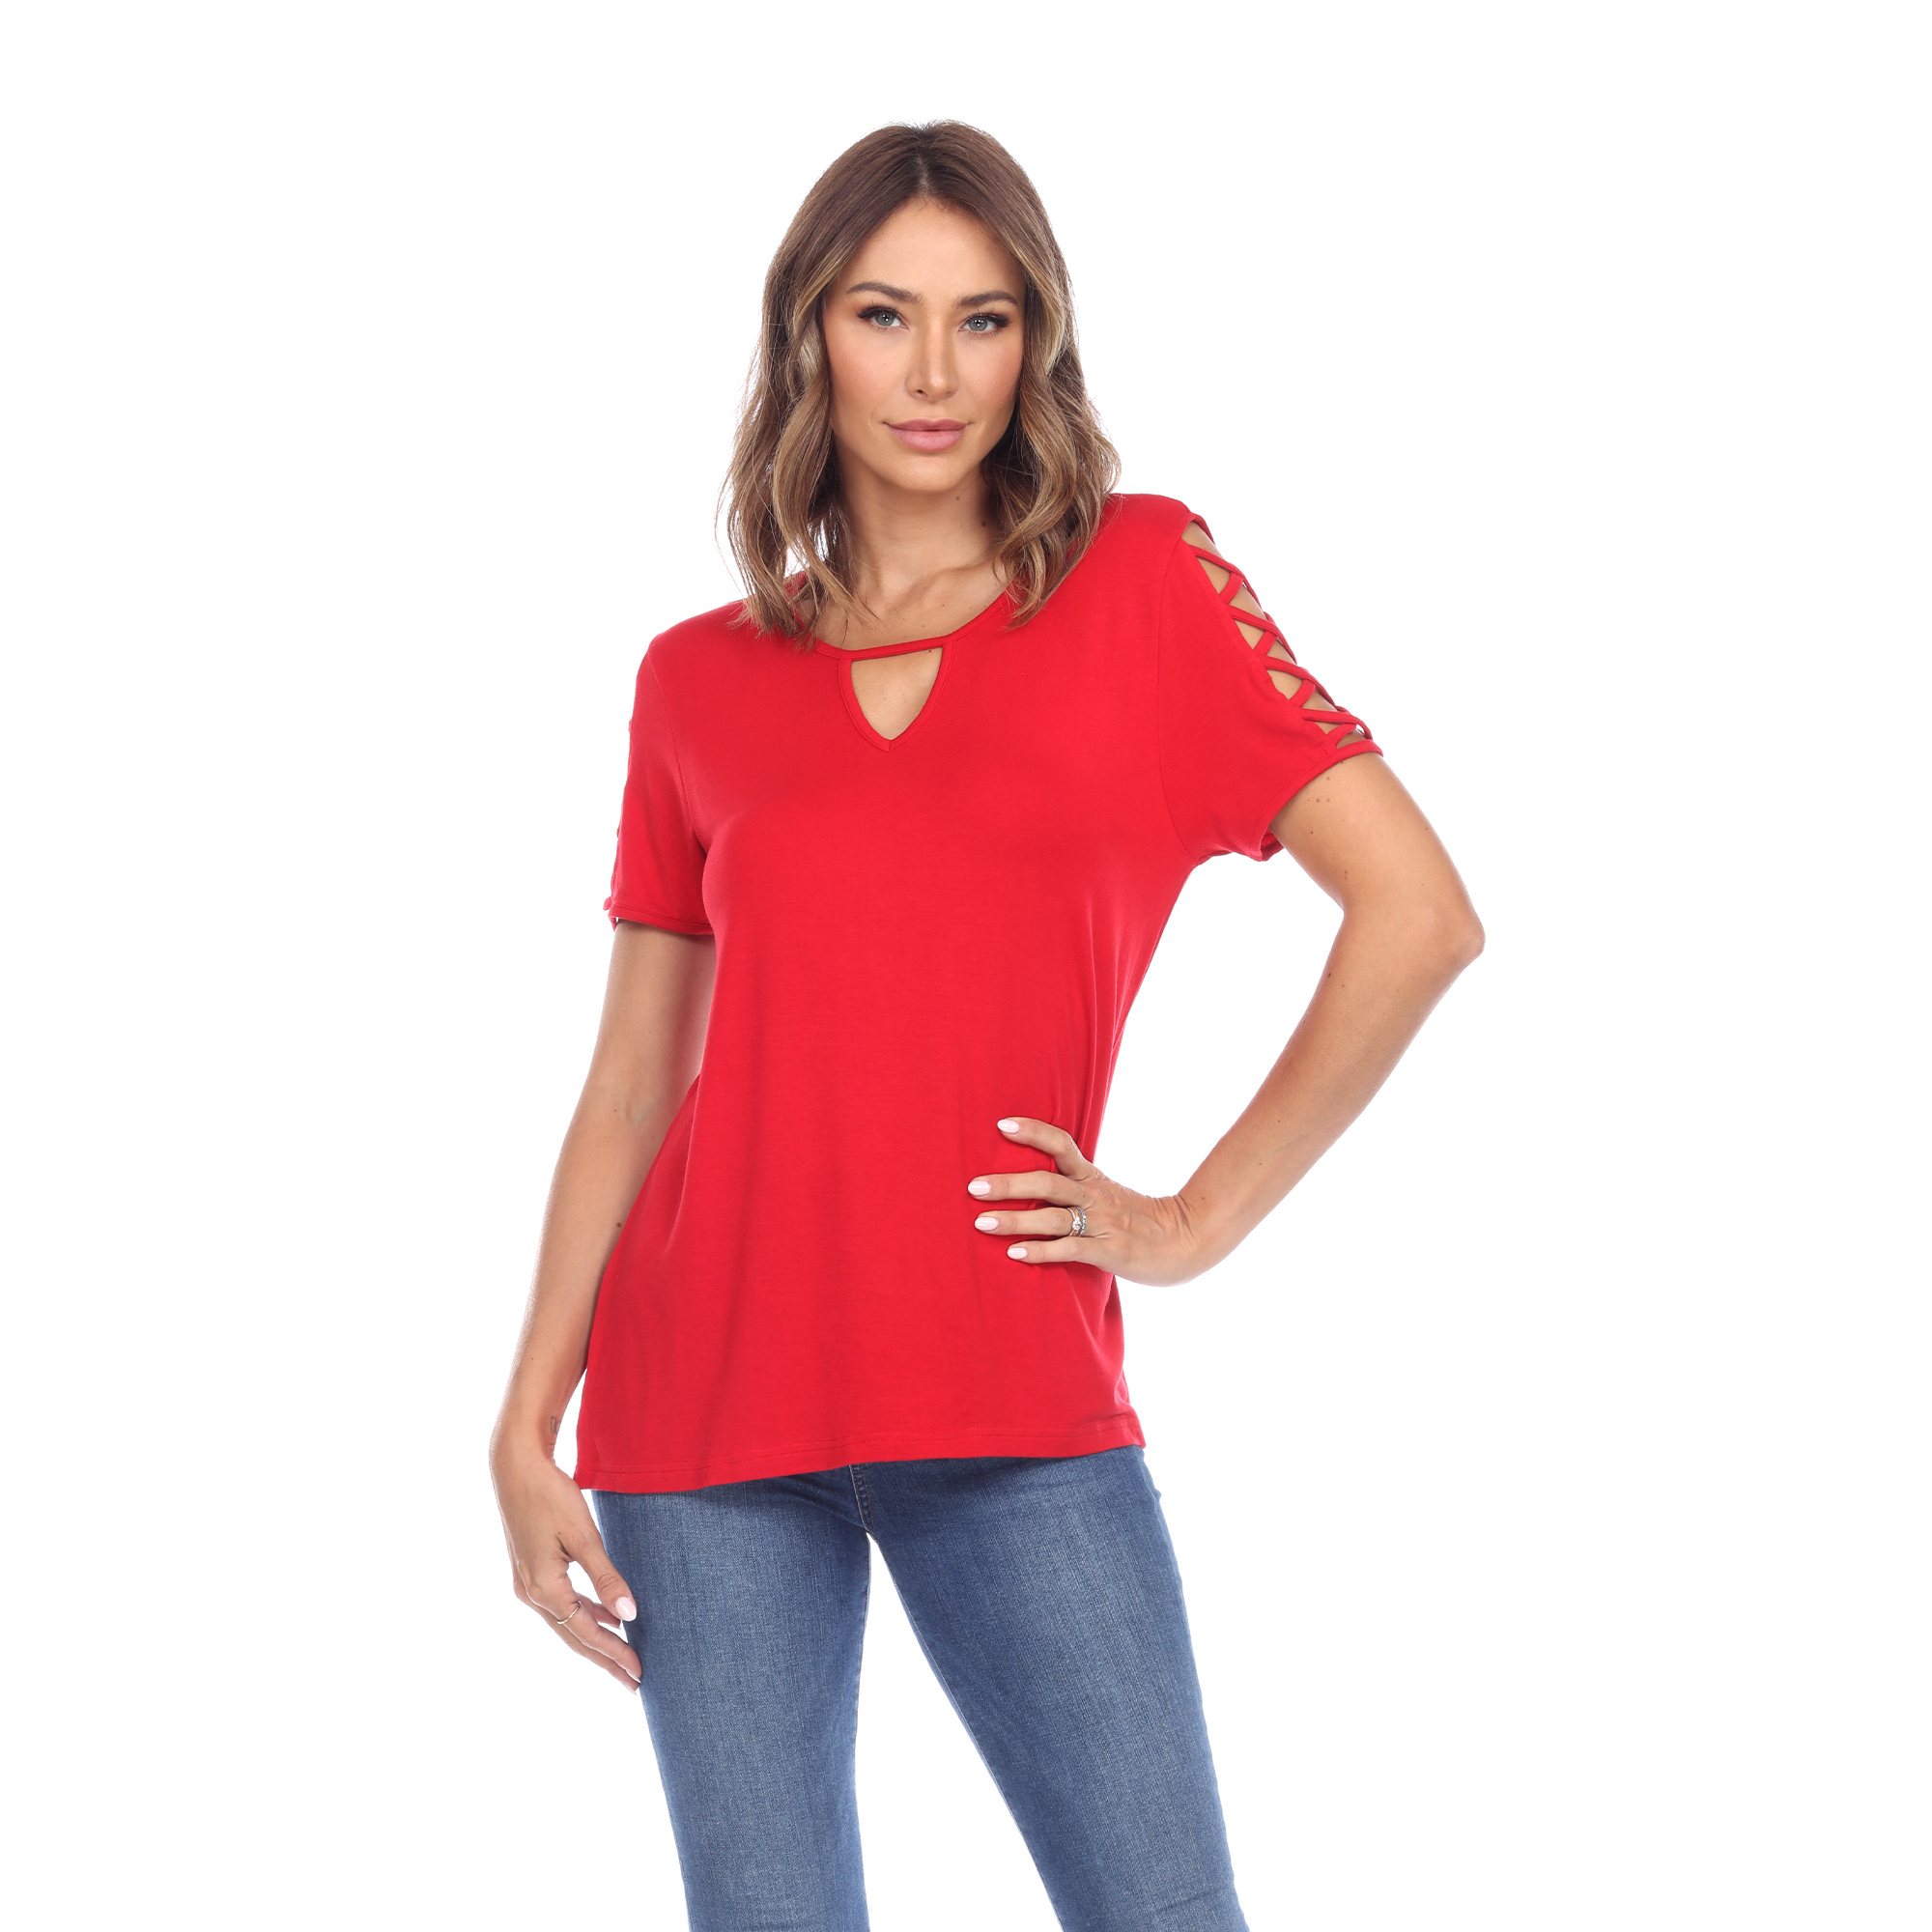 White Mark Women's Keyhole Neck Cutout Short Sleeve Top - Red, 1X